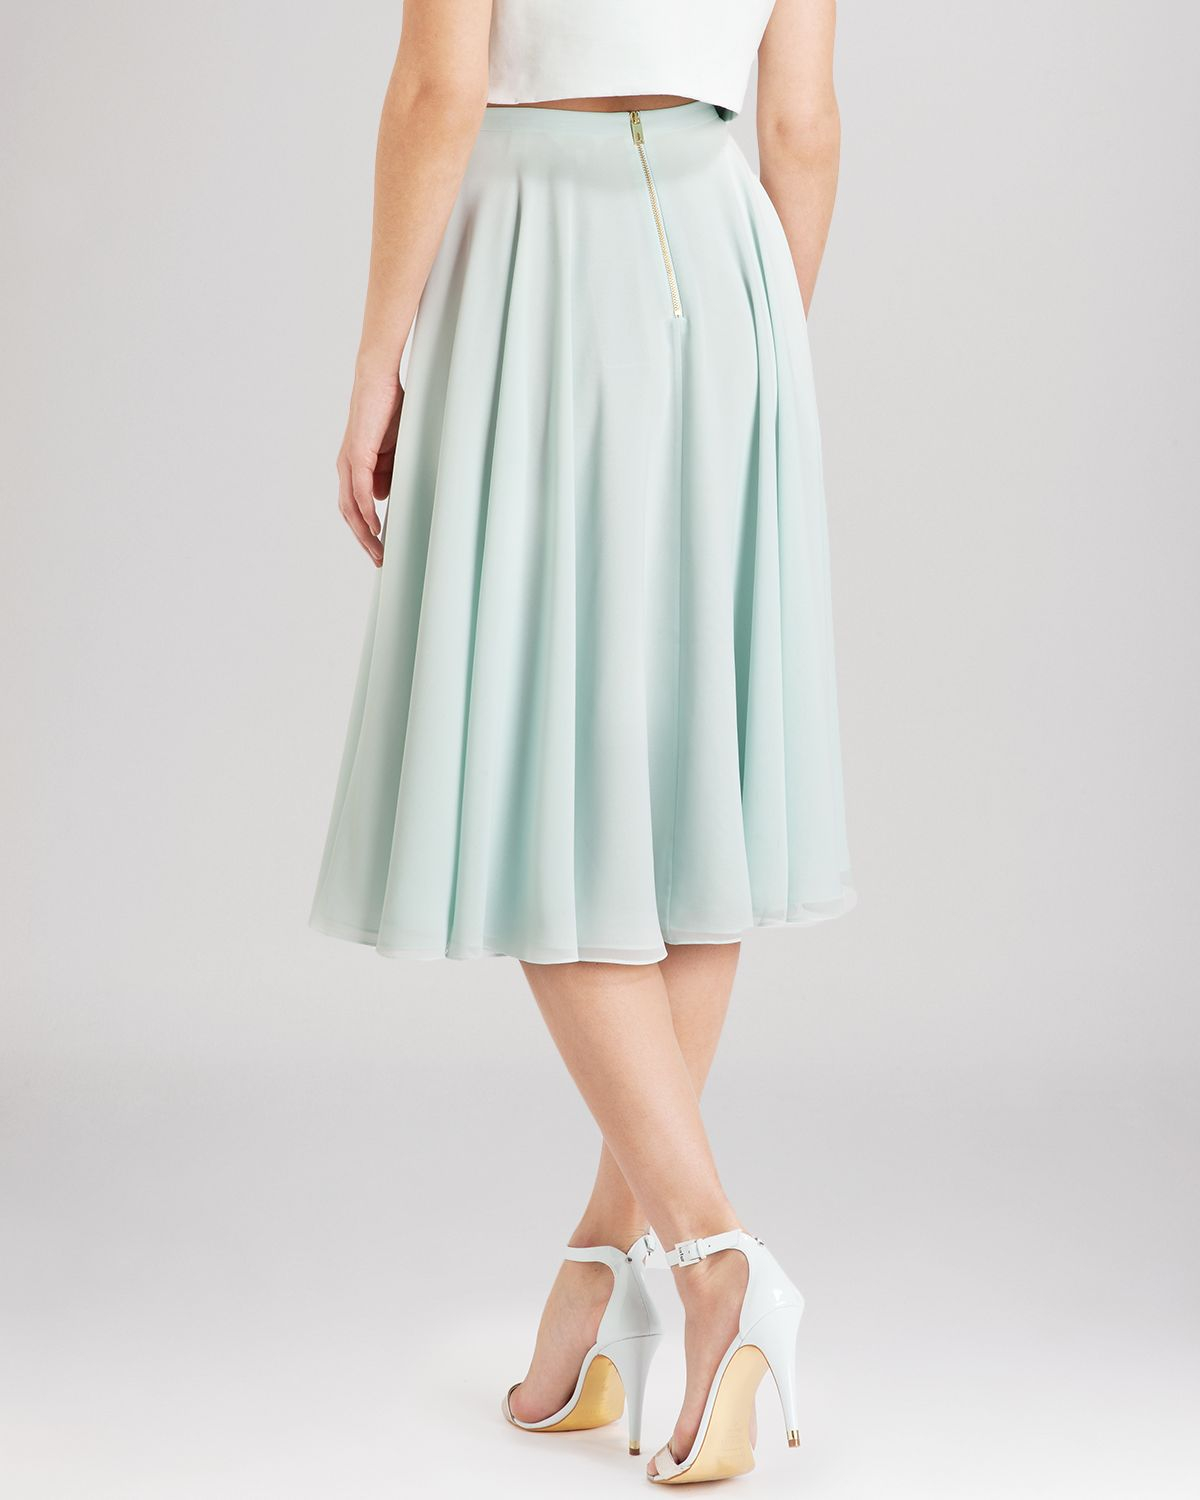 Lyst - Ted Baker Skirt - Neave A-Line in Green